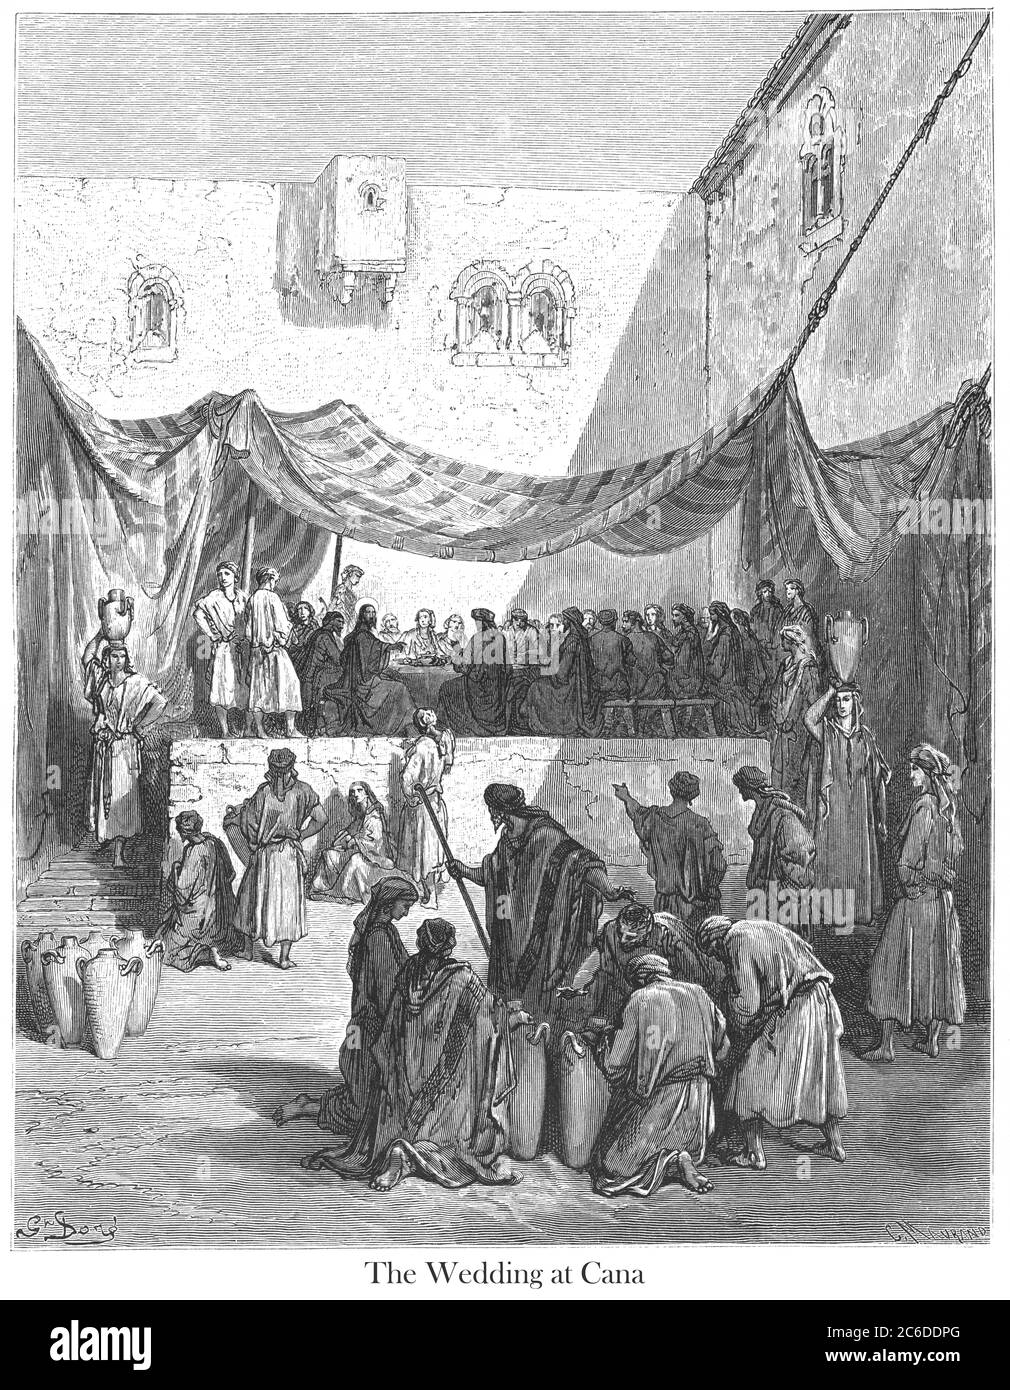 The Marriage at Cana [John 2:5-7] From the book 'Bible Gallery' Illustrated by Gustave Dore with Memoir of Dore and Descriptive Letter-press by Talbot W. Chambers D.D. Published by Cassell & Company Limited in London and simultaneously by Mame in Tours, France in 1866 Stock Photo